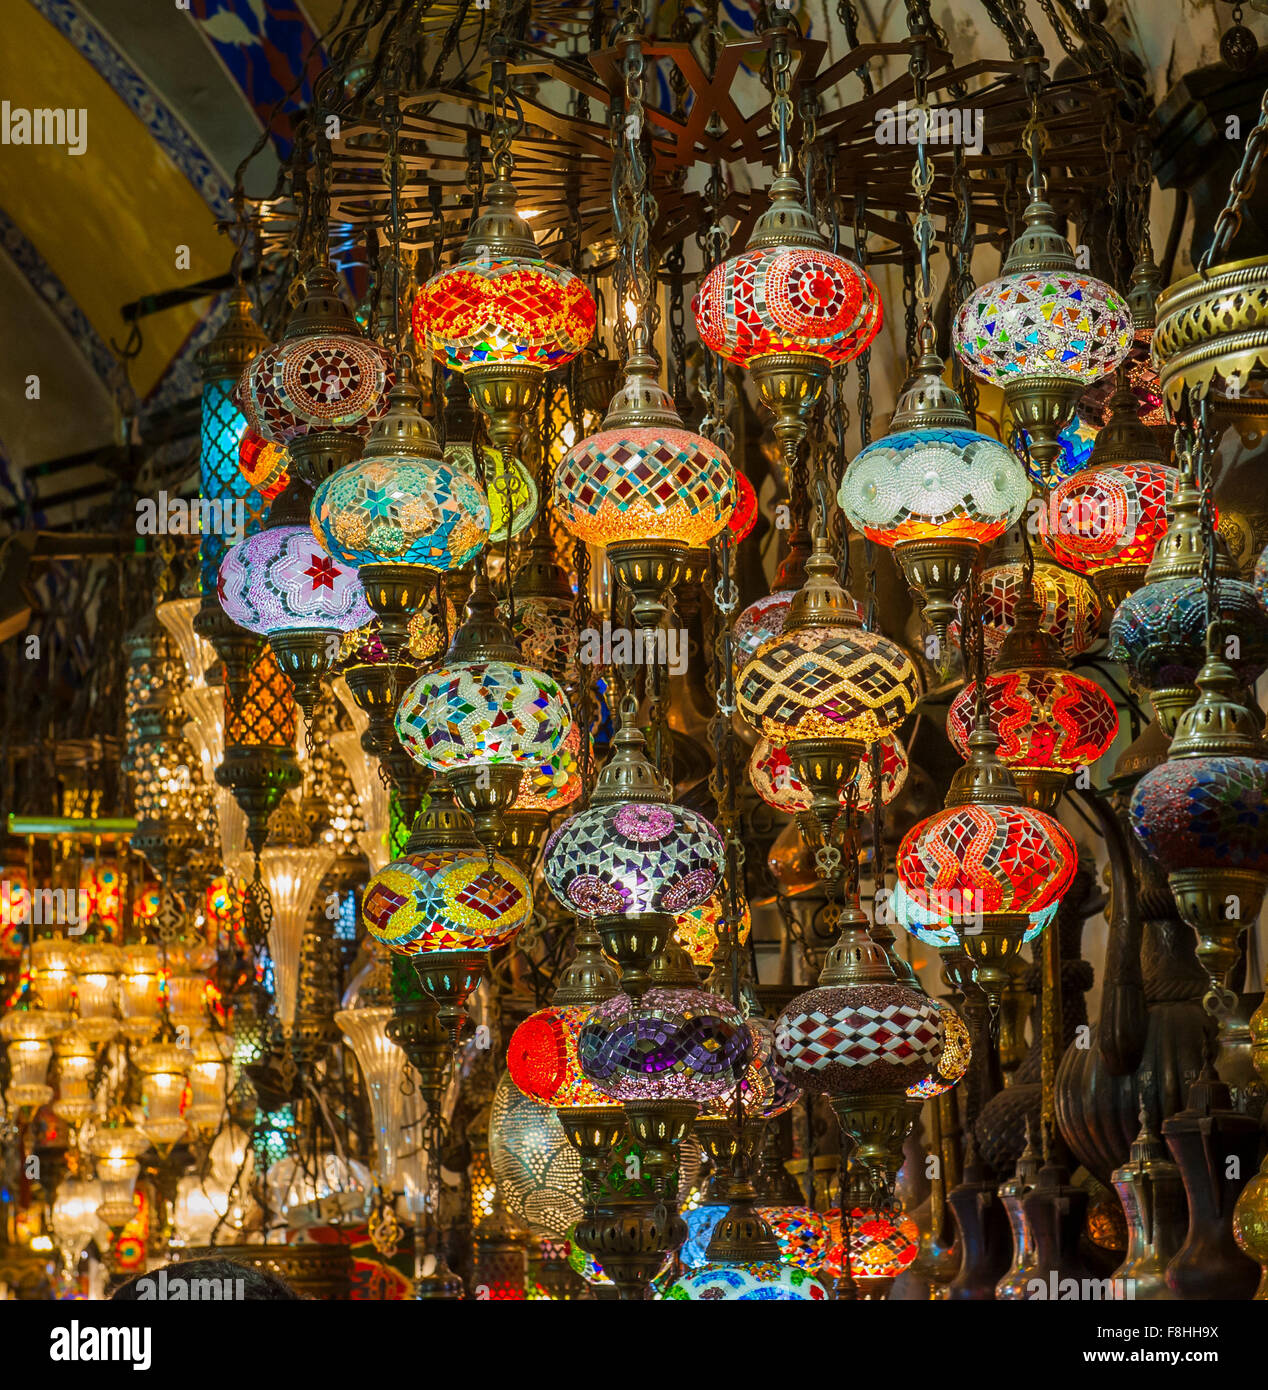 Ornate hanging glass lights at a stall in a market souk inside the grand bazaar Istanbul Turkey Stock Photo